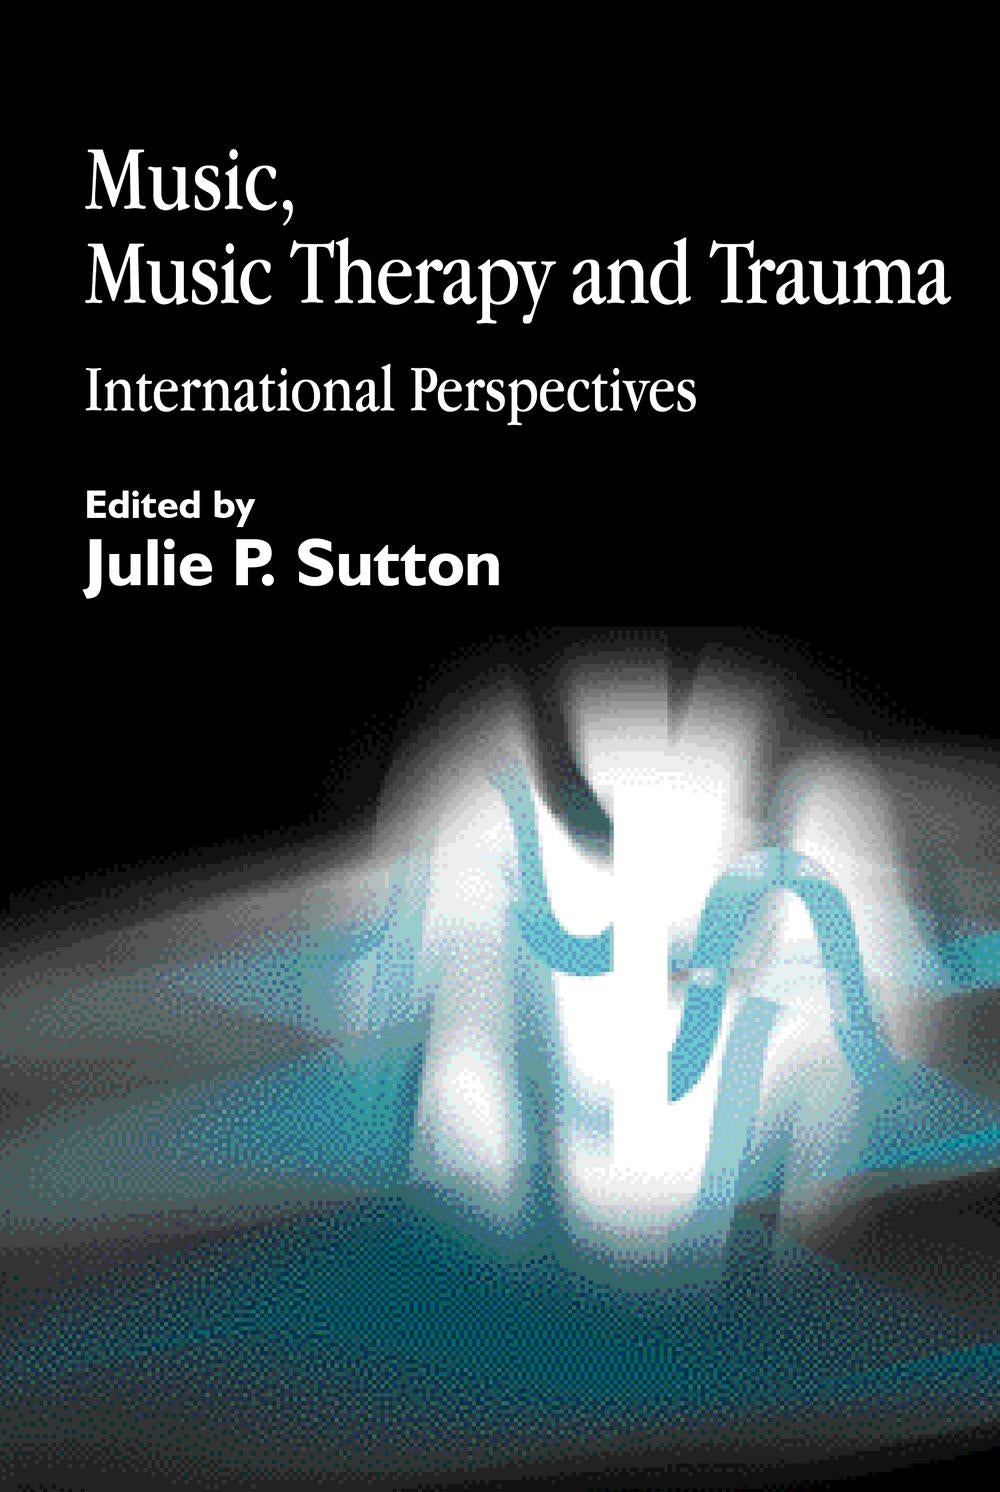 Music, Music Therapy and Trauma by No Author Listed, Julie Sutton